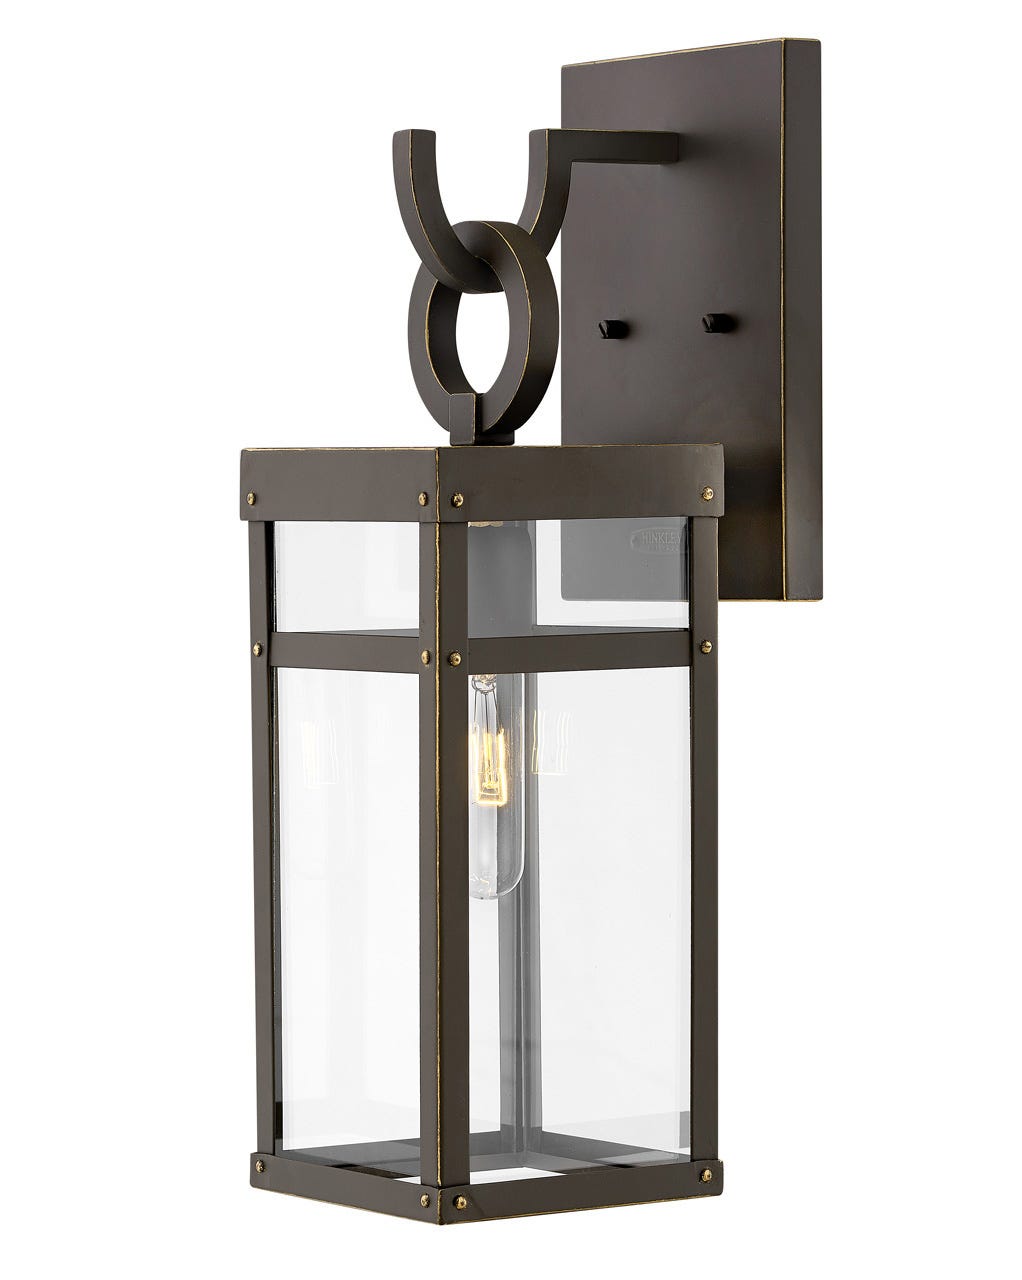 OUTDOOR PORTER Wall Mount Lantern Outdoor l Wall Hinkley Oil Rubbed Bronze 7.25x6.0x18.5 